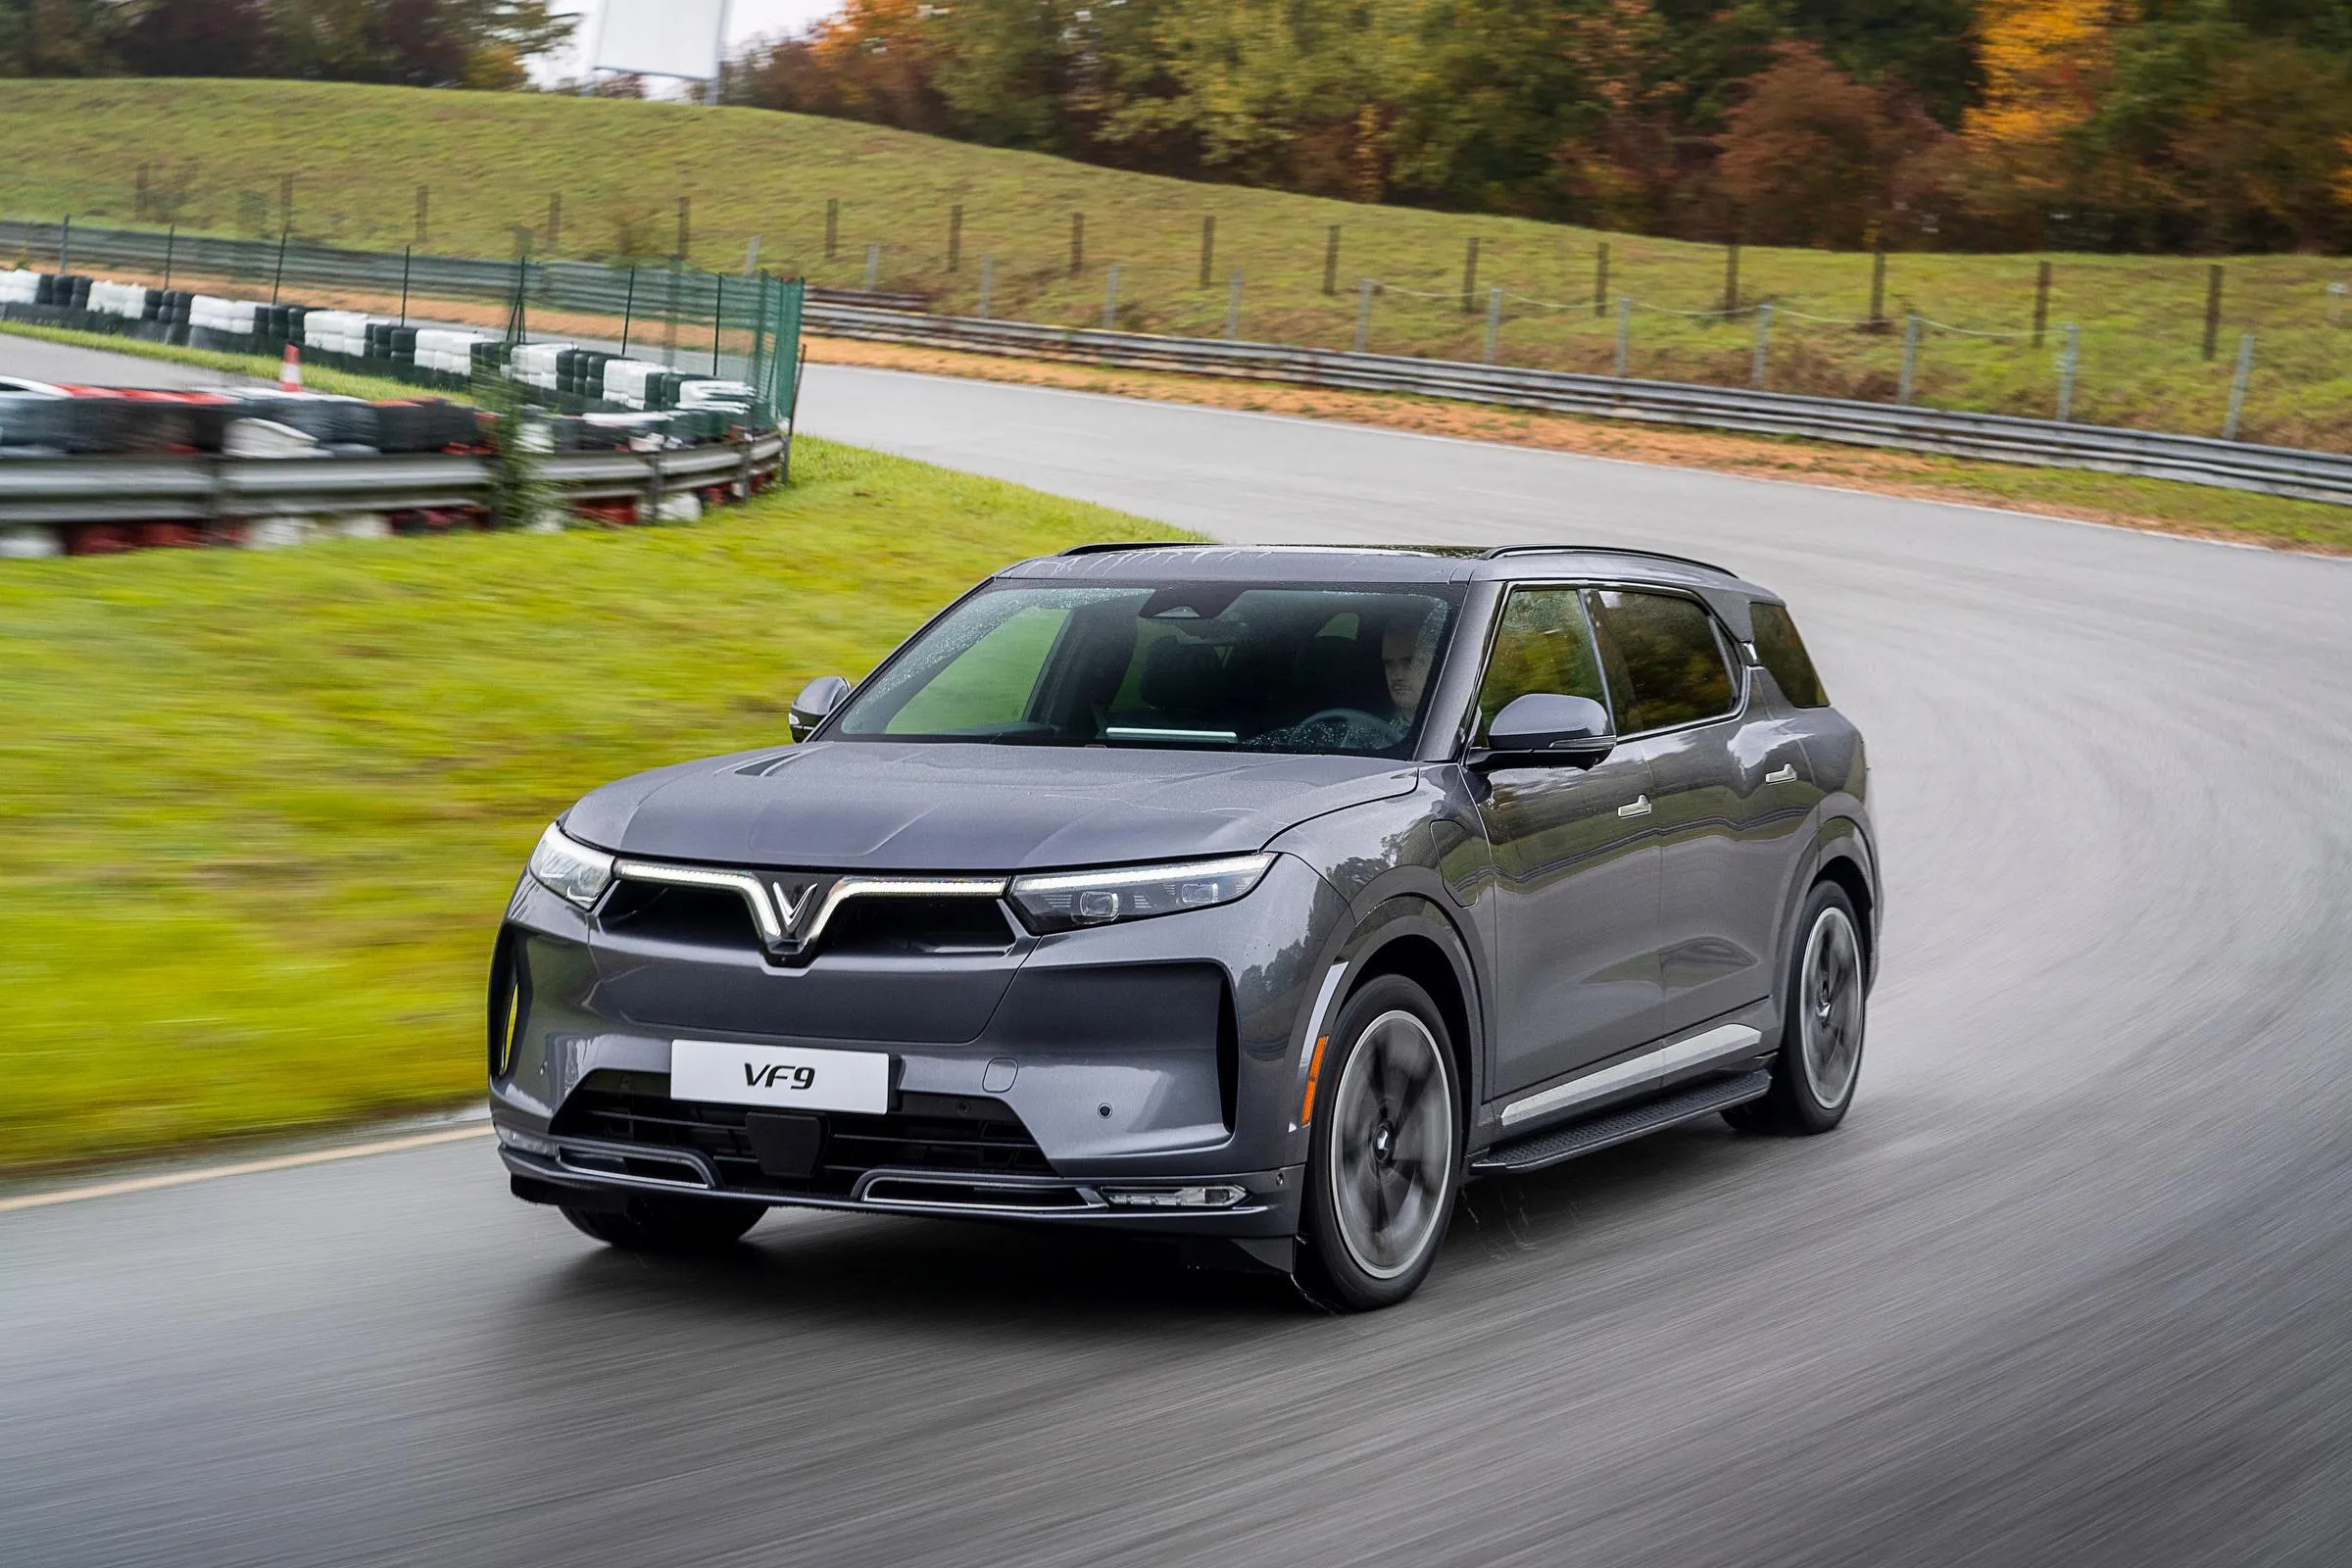 Vinfast claims 330-mile range for VF 9 three-row electric SUV